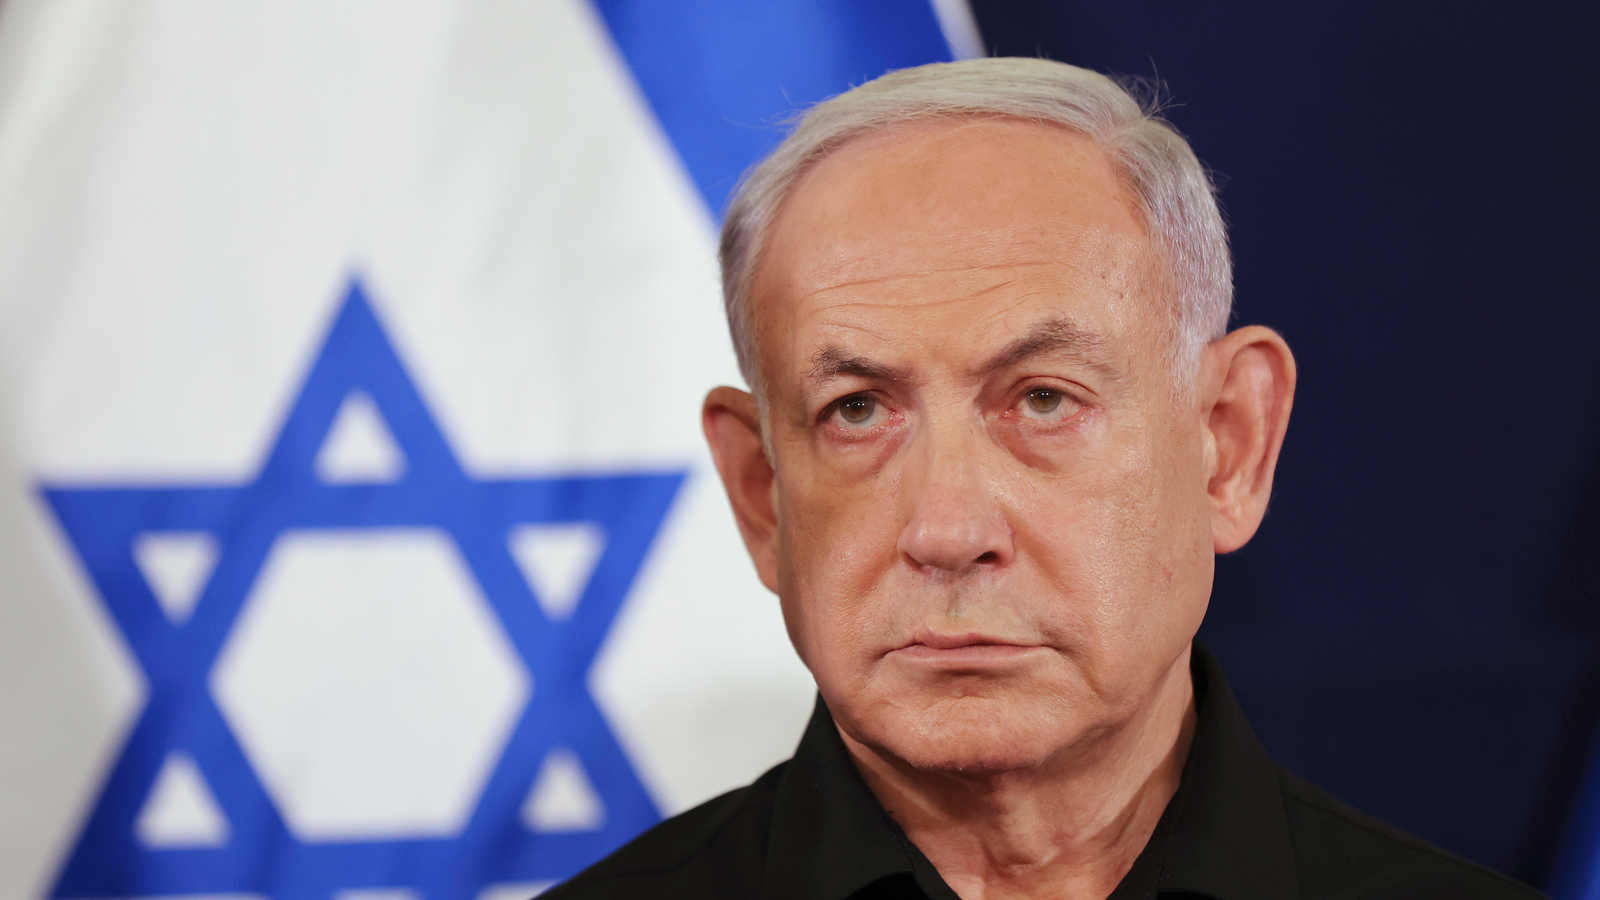 Al Jazeera banned in Israel? Benjamin Netanyahu’s hard-line government orders Qatar news network to close local offices [Video]